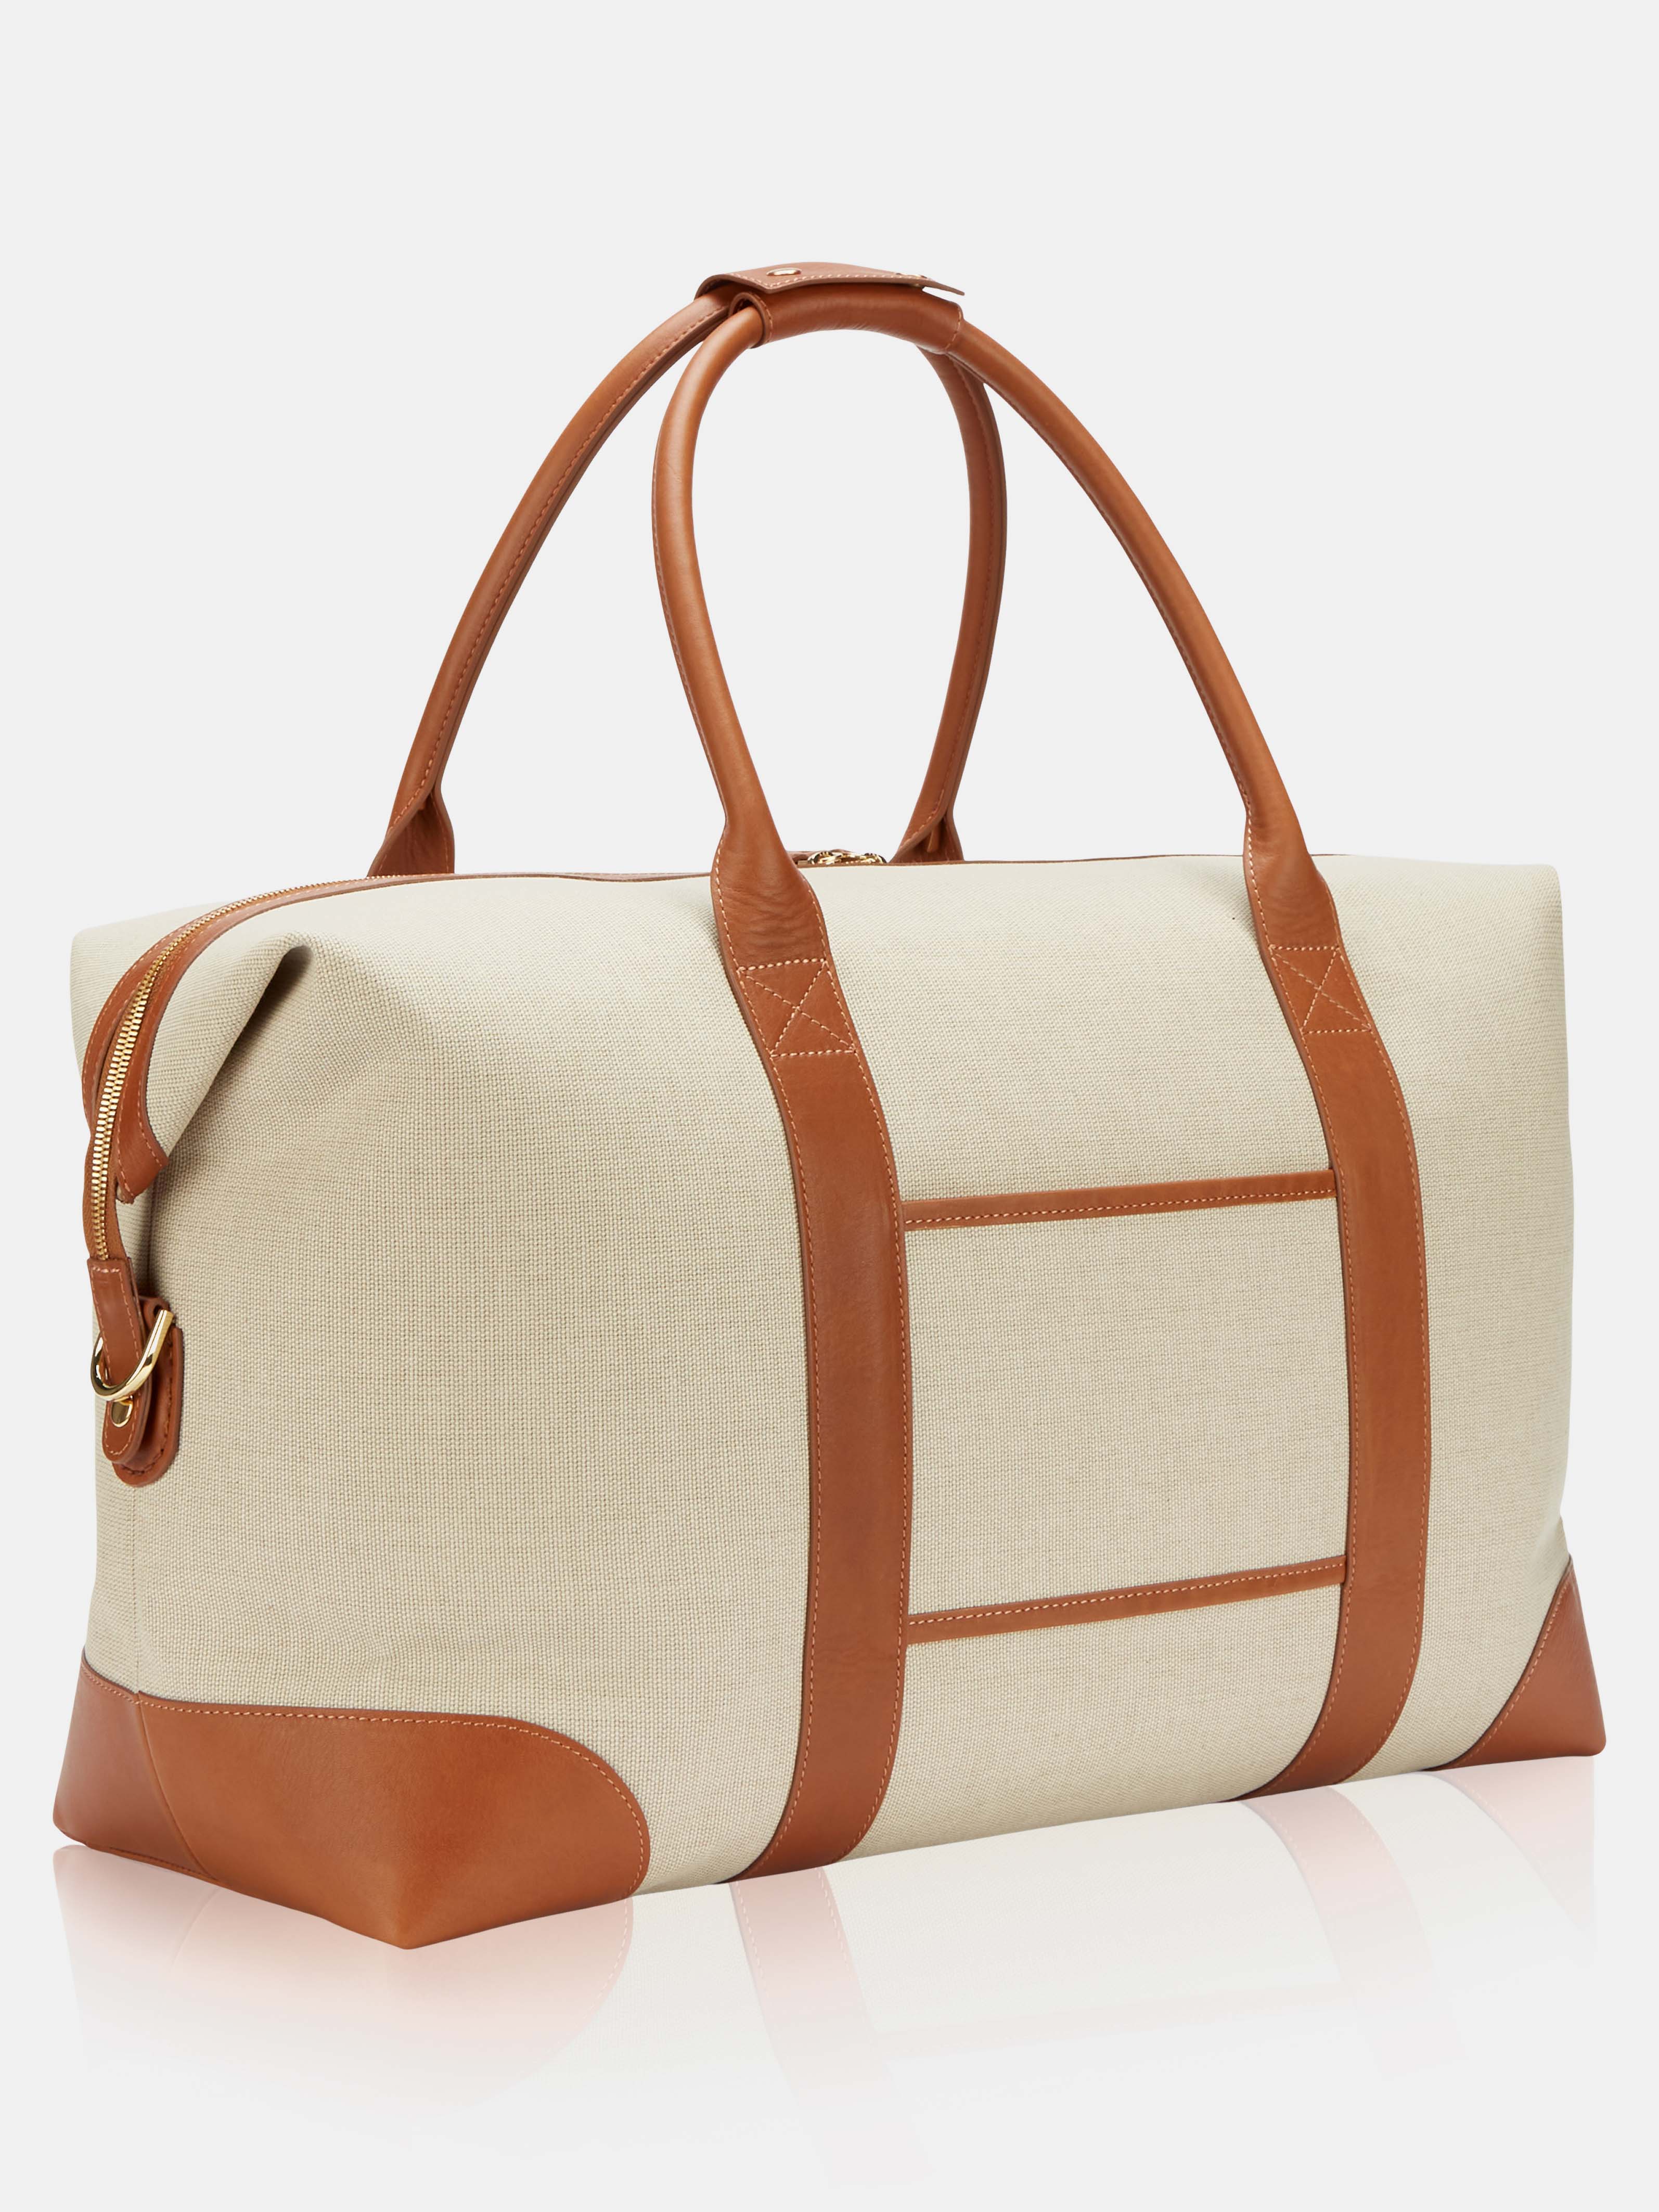 Letter 'M' The Weekend Bag, Cream & Claret